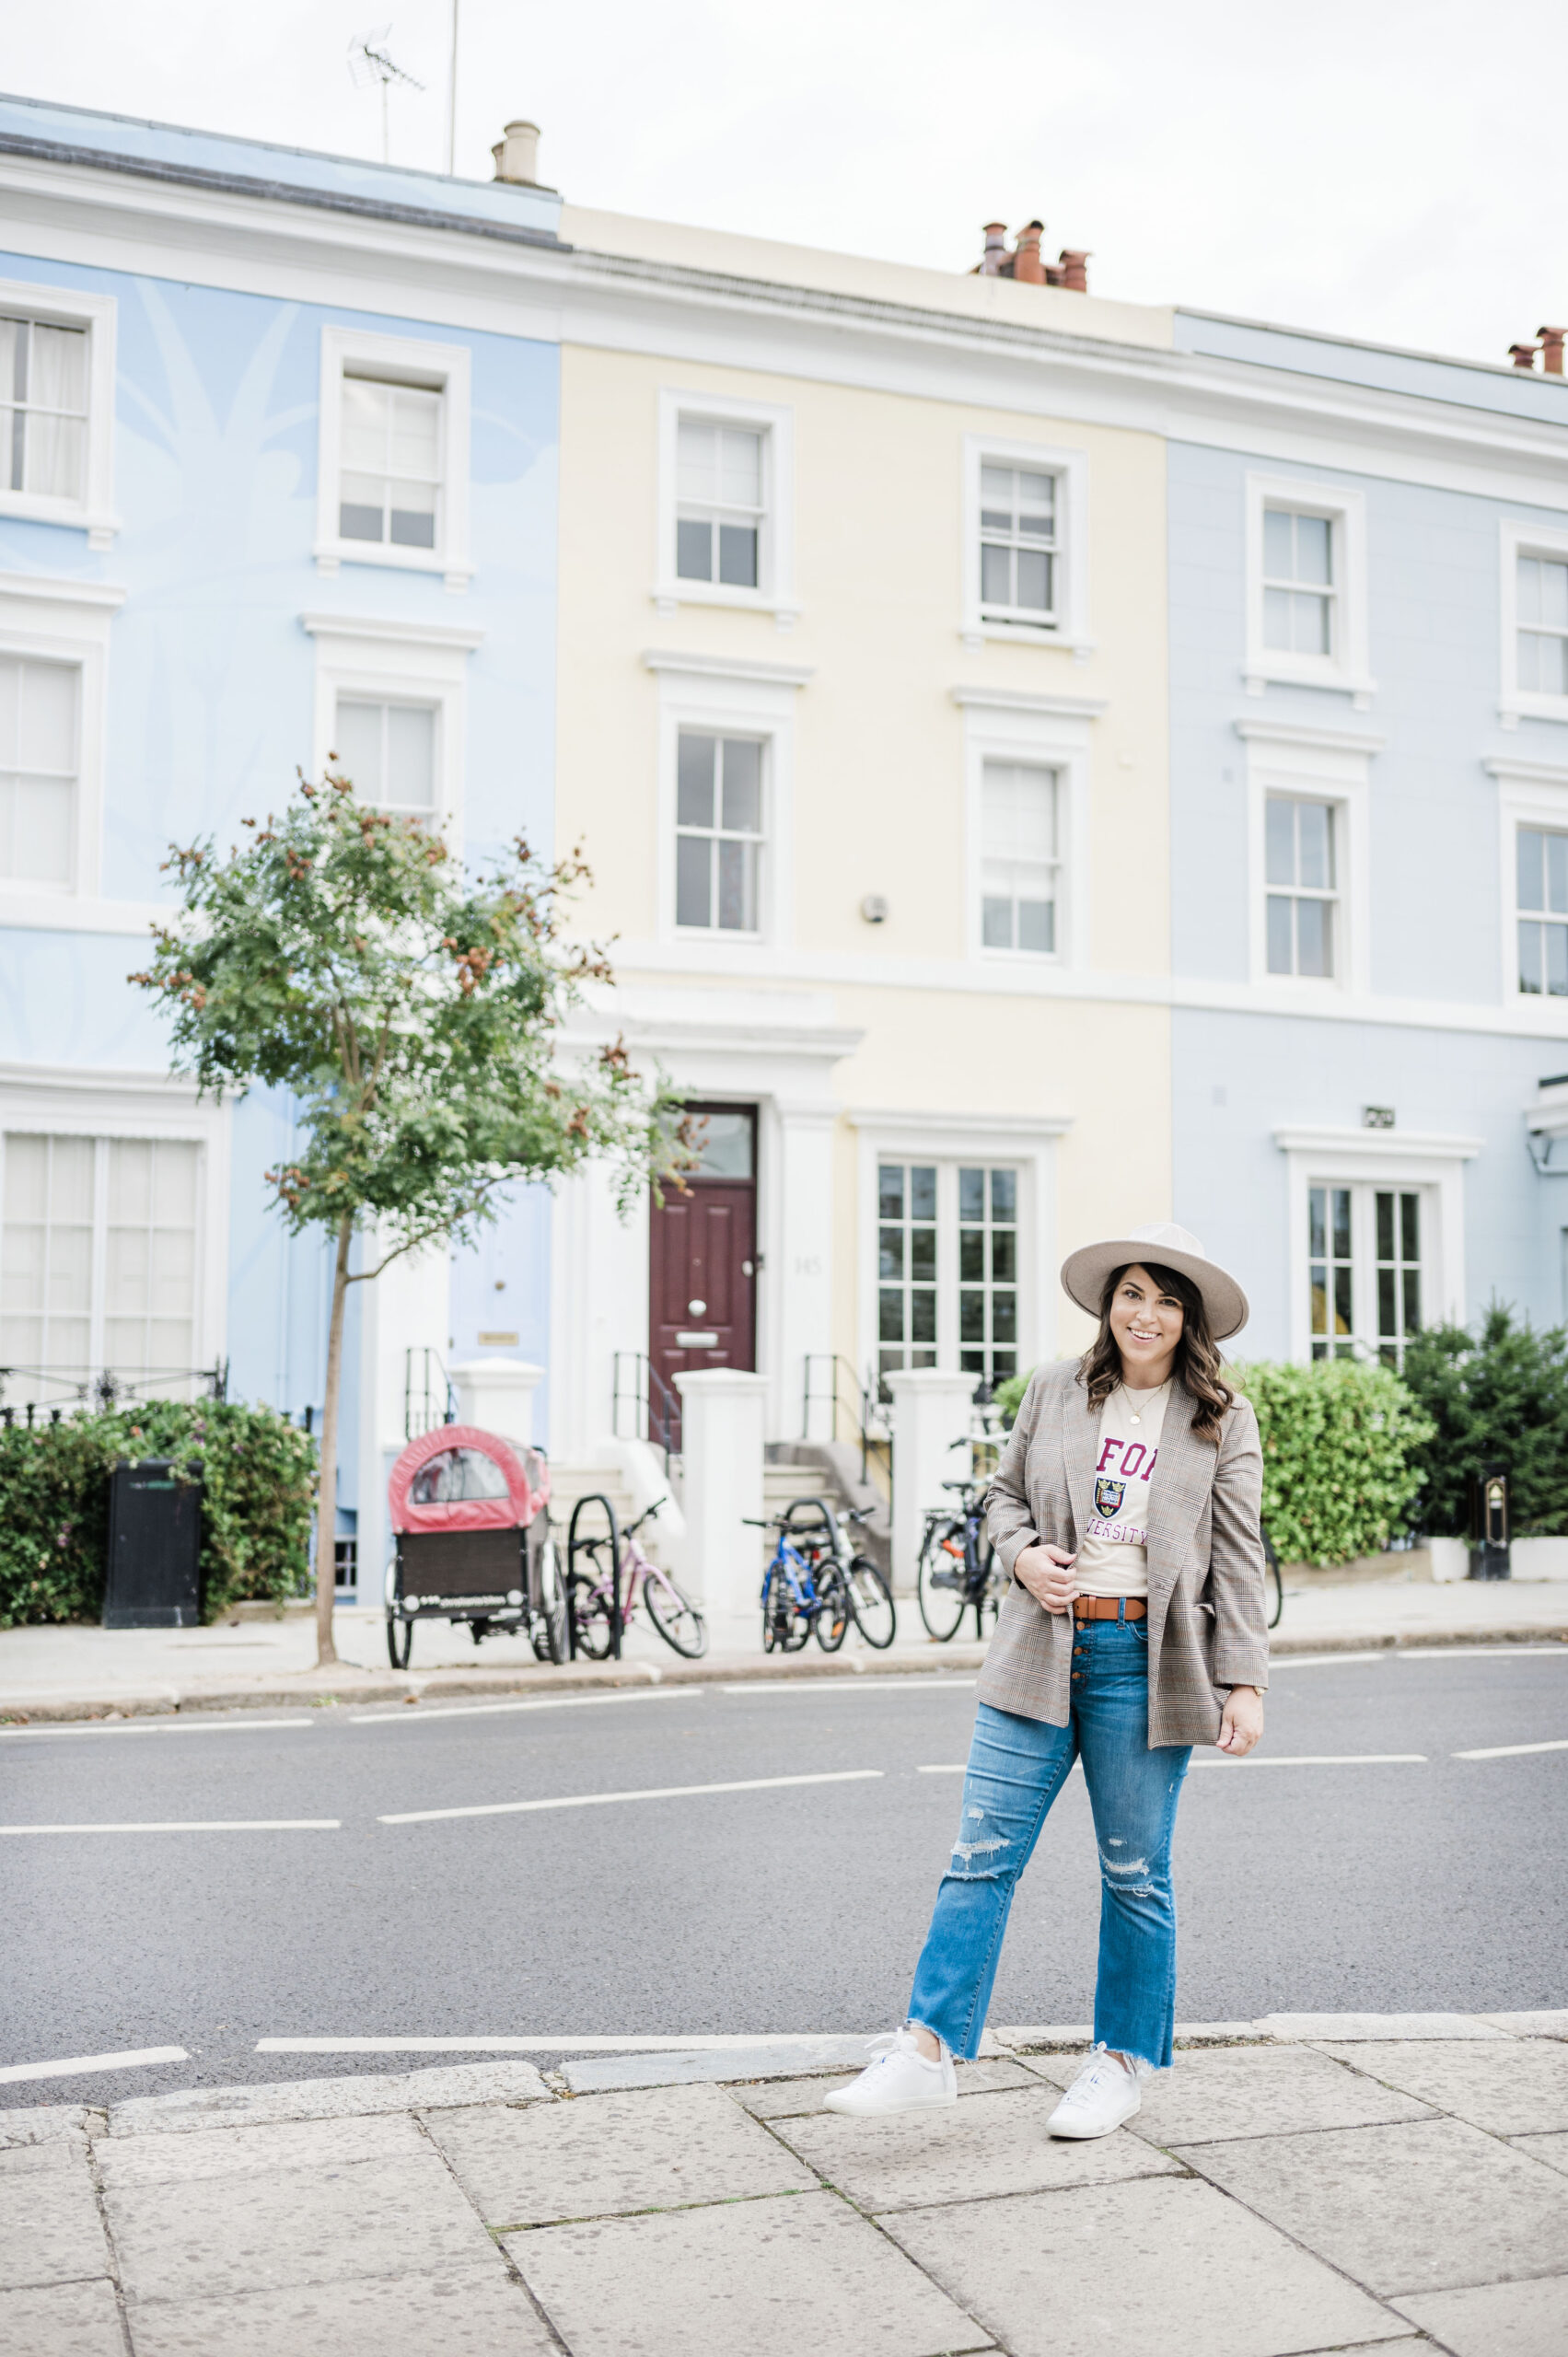 brittney naylor wearing jeans, brown blazer, hat, in notting hill london, 4 day london itinerary